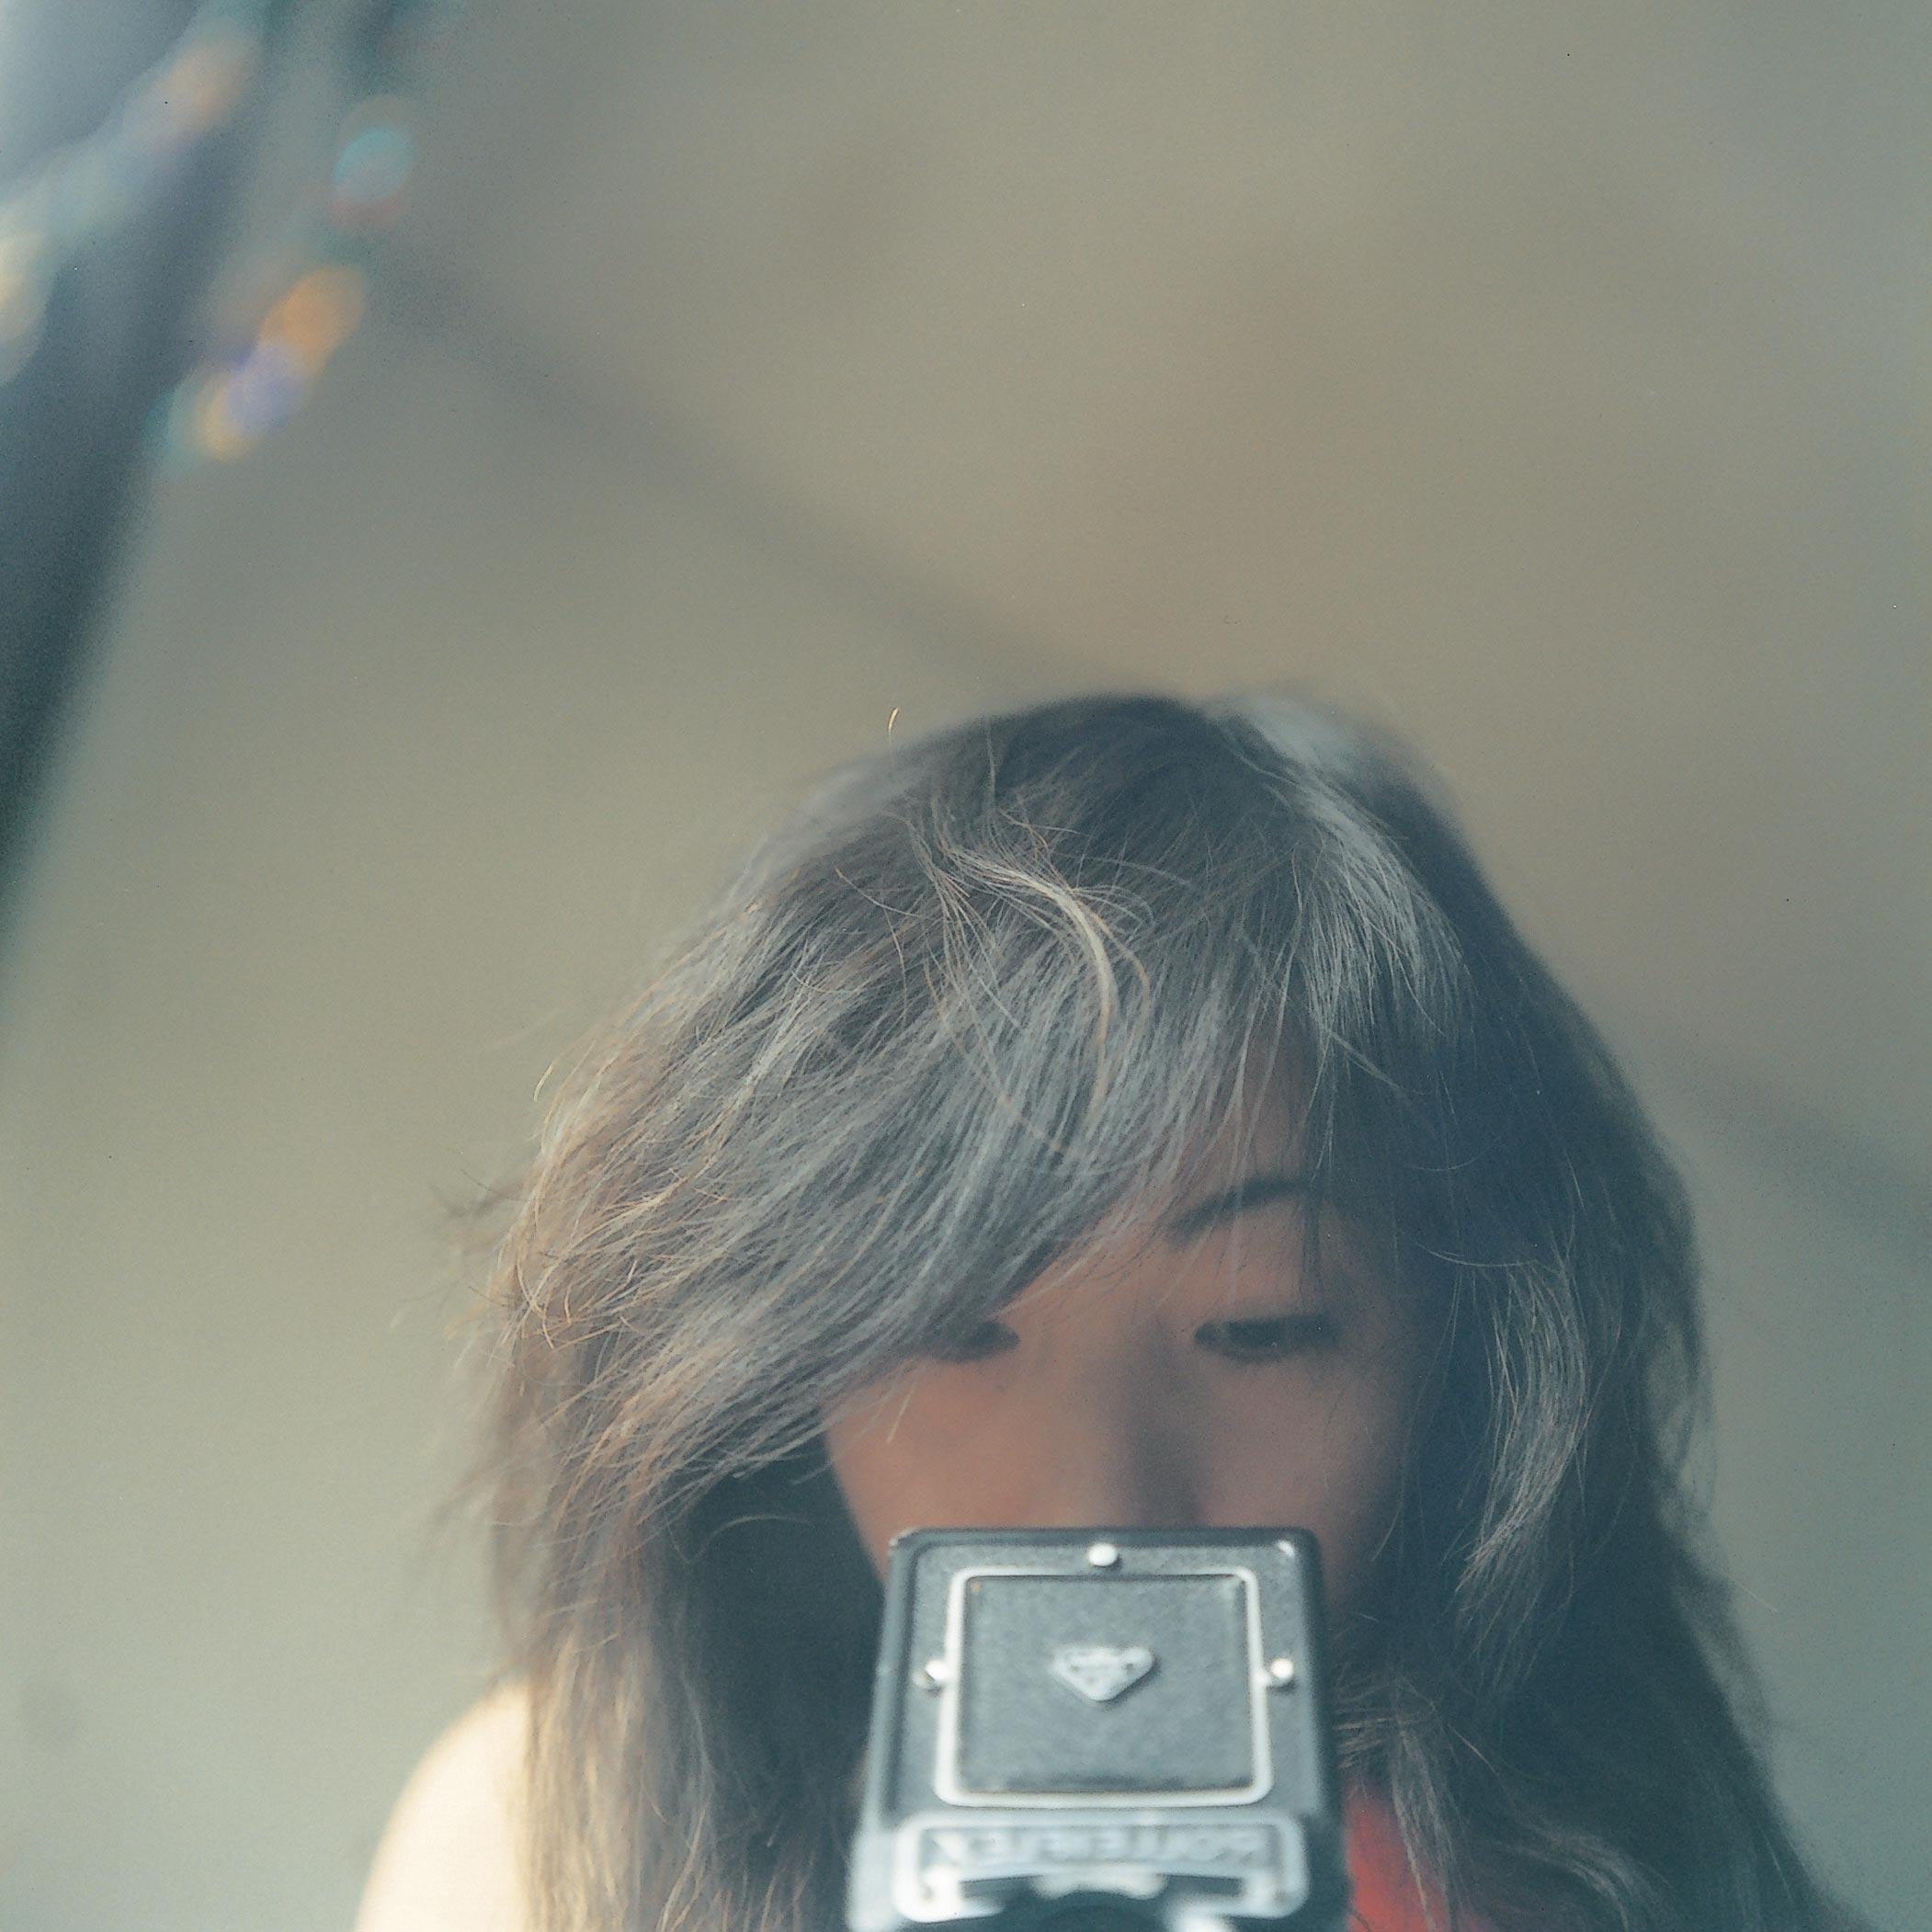 Untitled, from the series 'Cui Cui' – Rinko Kawauchi, Self-portrait, Photography